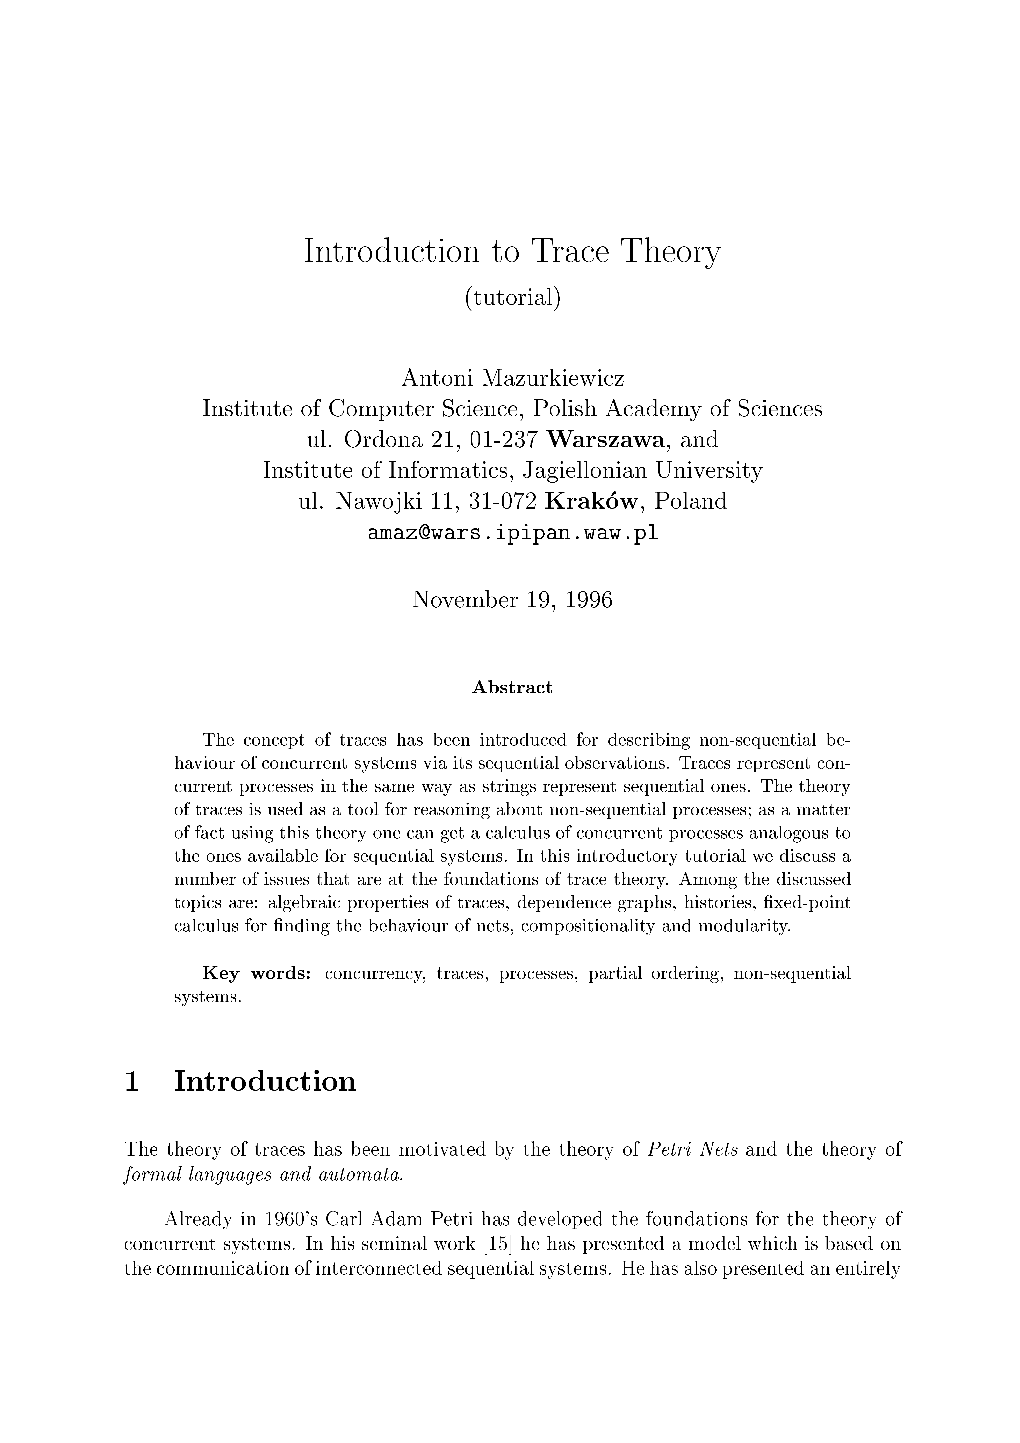 Introduction to Trace Theory 1 Introduction